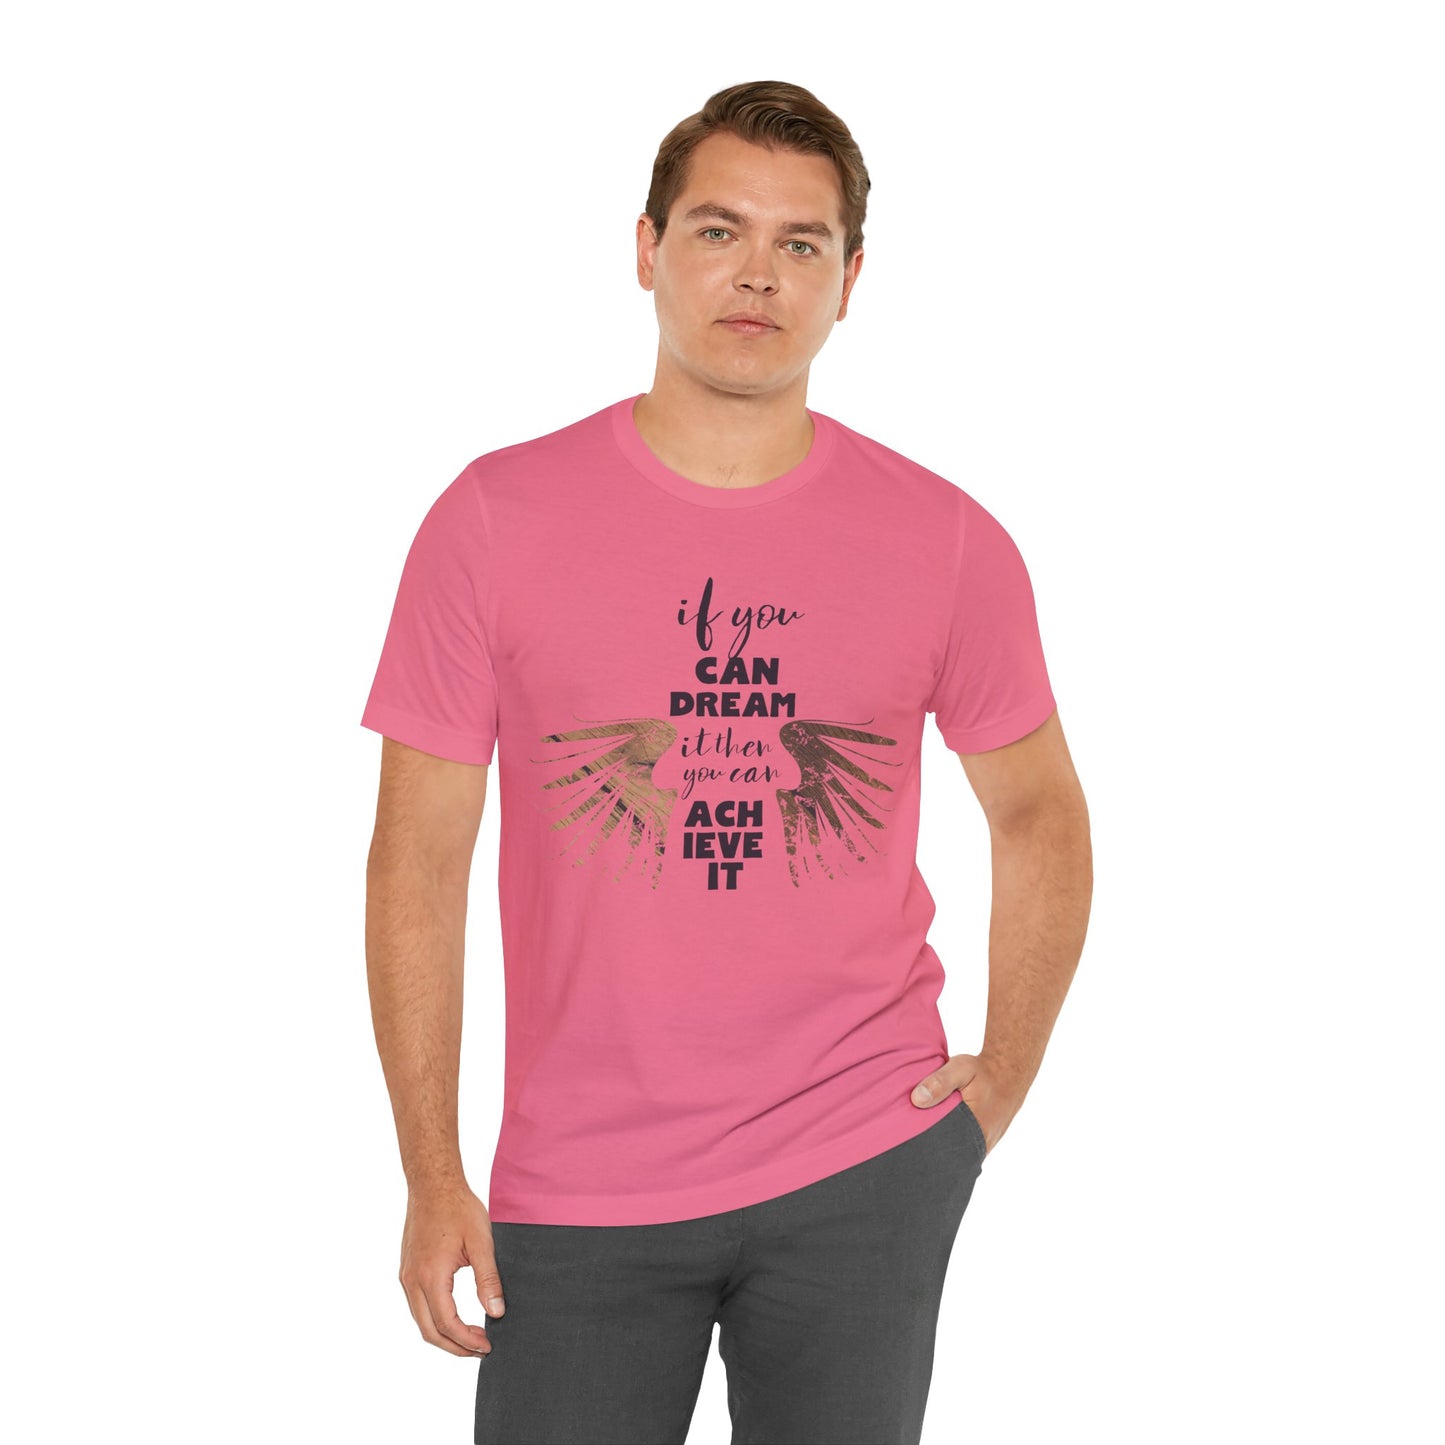 If You Can Dream It Then You Can Achieve It Inspirational Quote Short Sleeve T-Shirt - Unisex - Motivational Treats